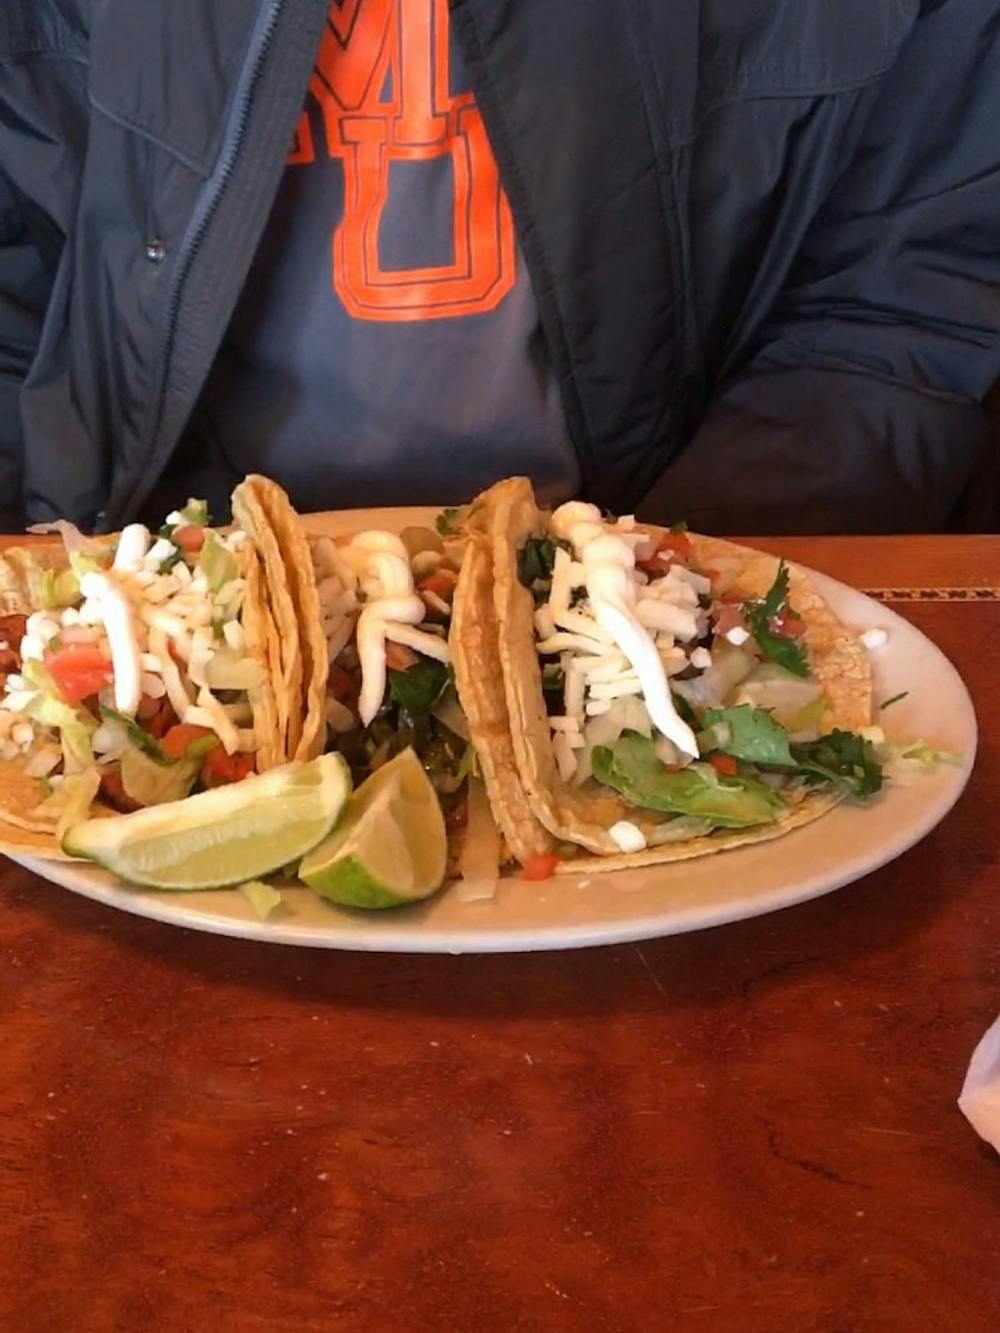 The tacos come with a variety of ingredients; pictured are tacos with cactus, chicken and beef.